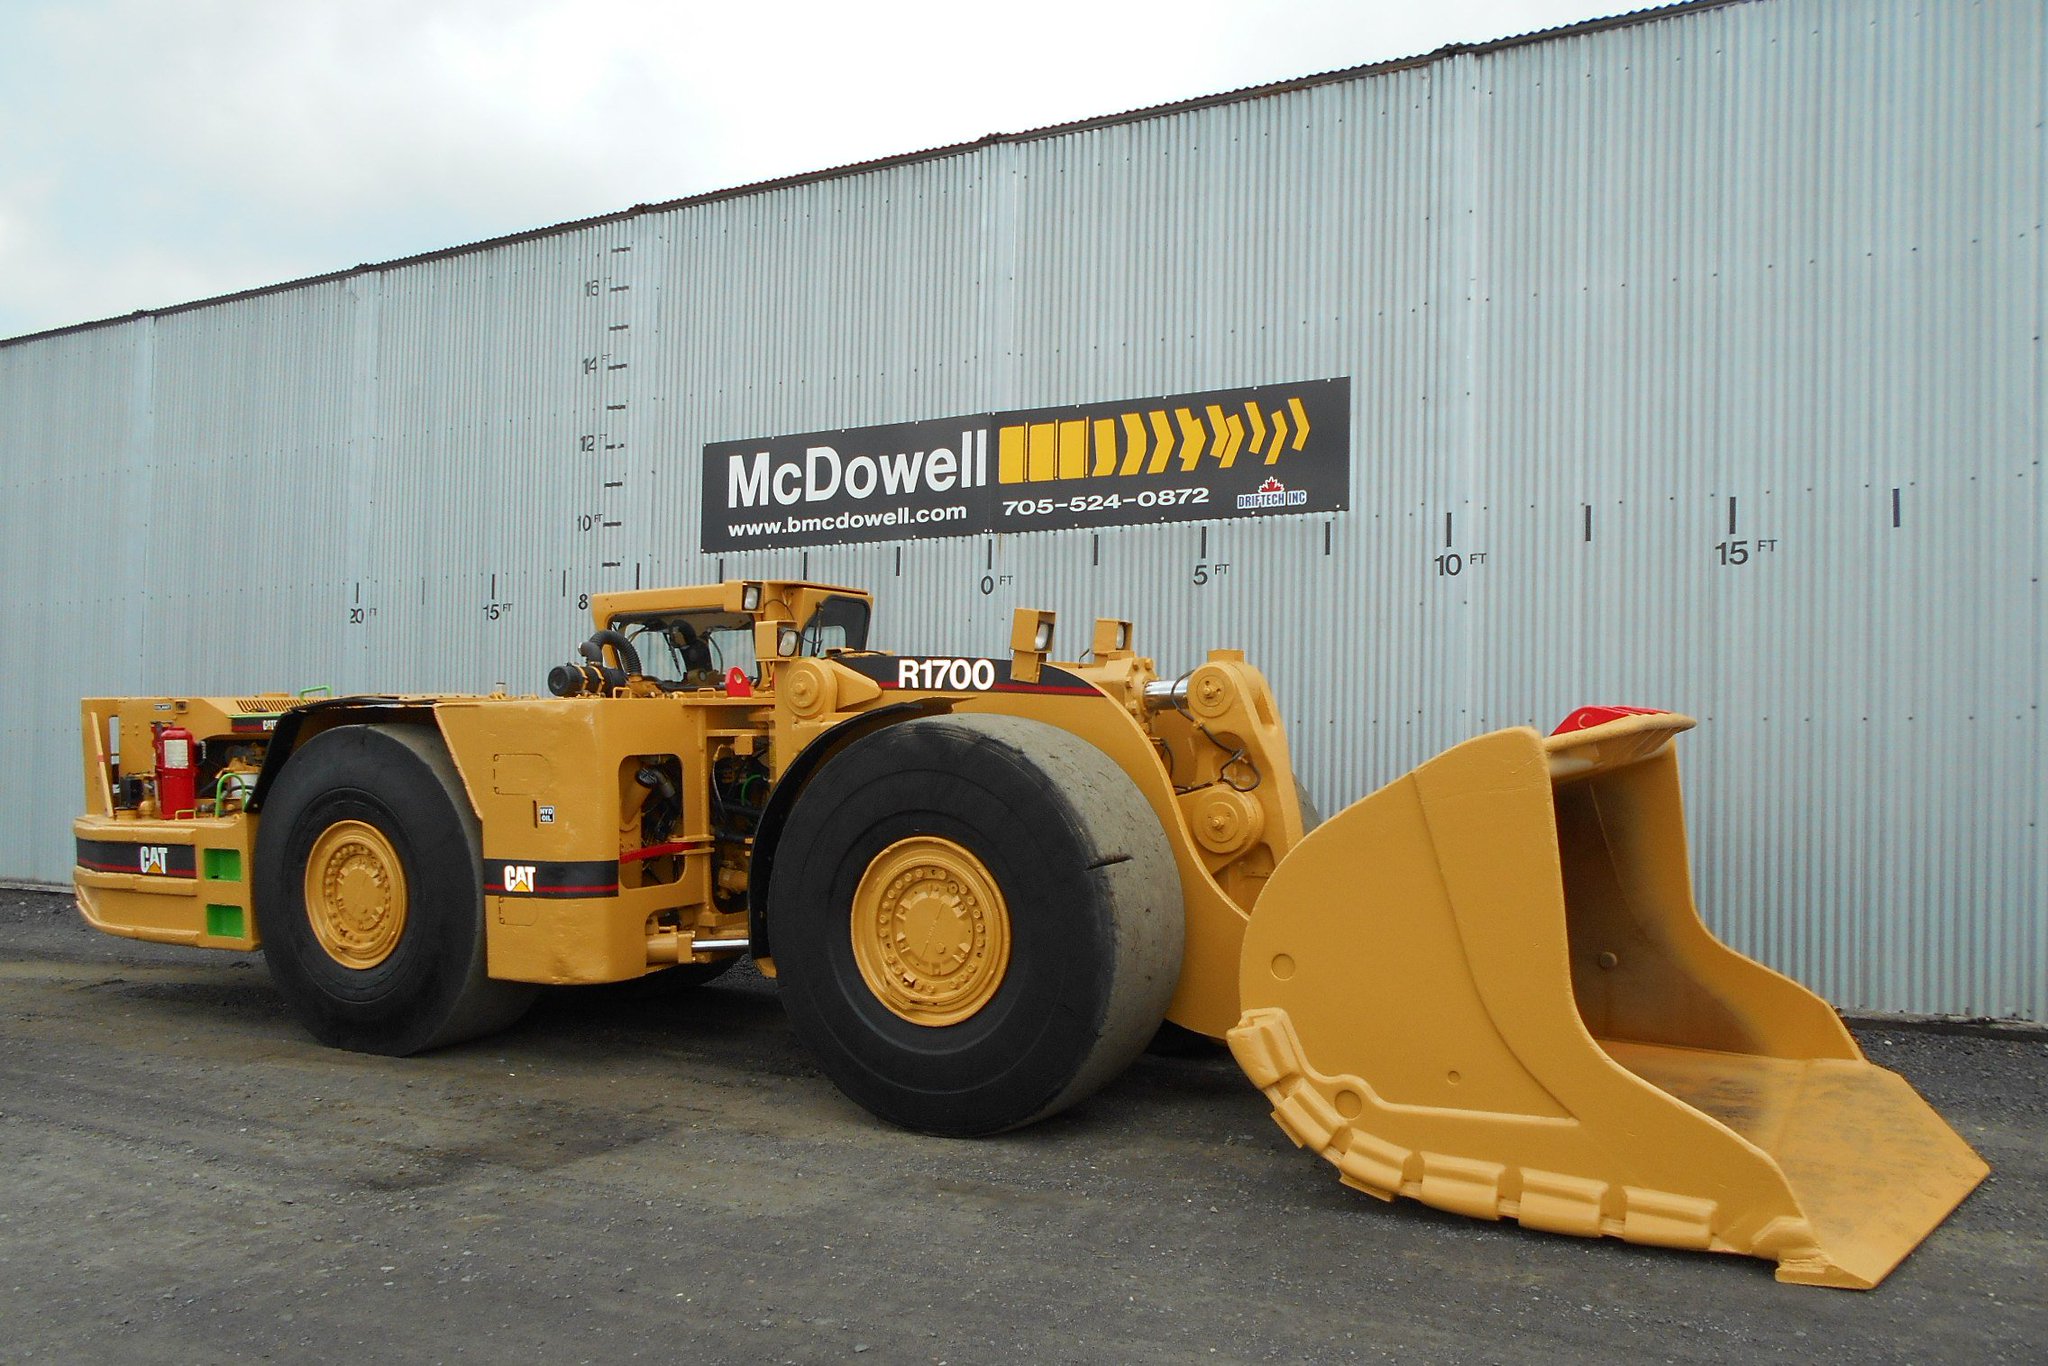 B.McDowell Equipment on Twitter "Cat R1700 10 Yard Scooptram Available